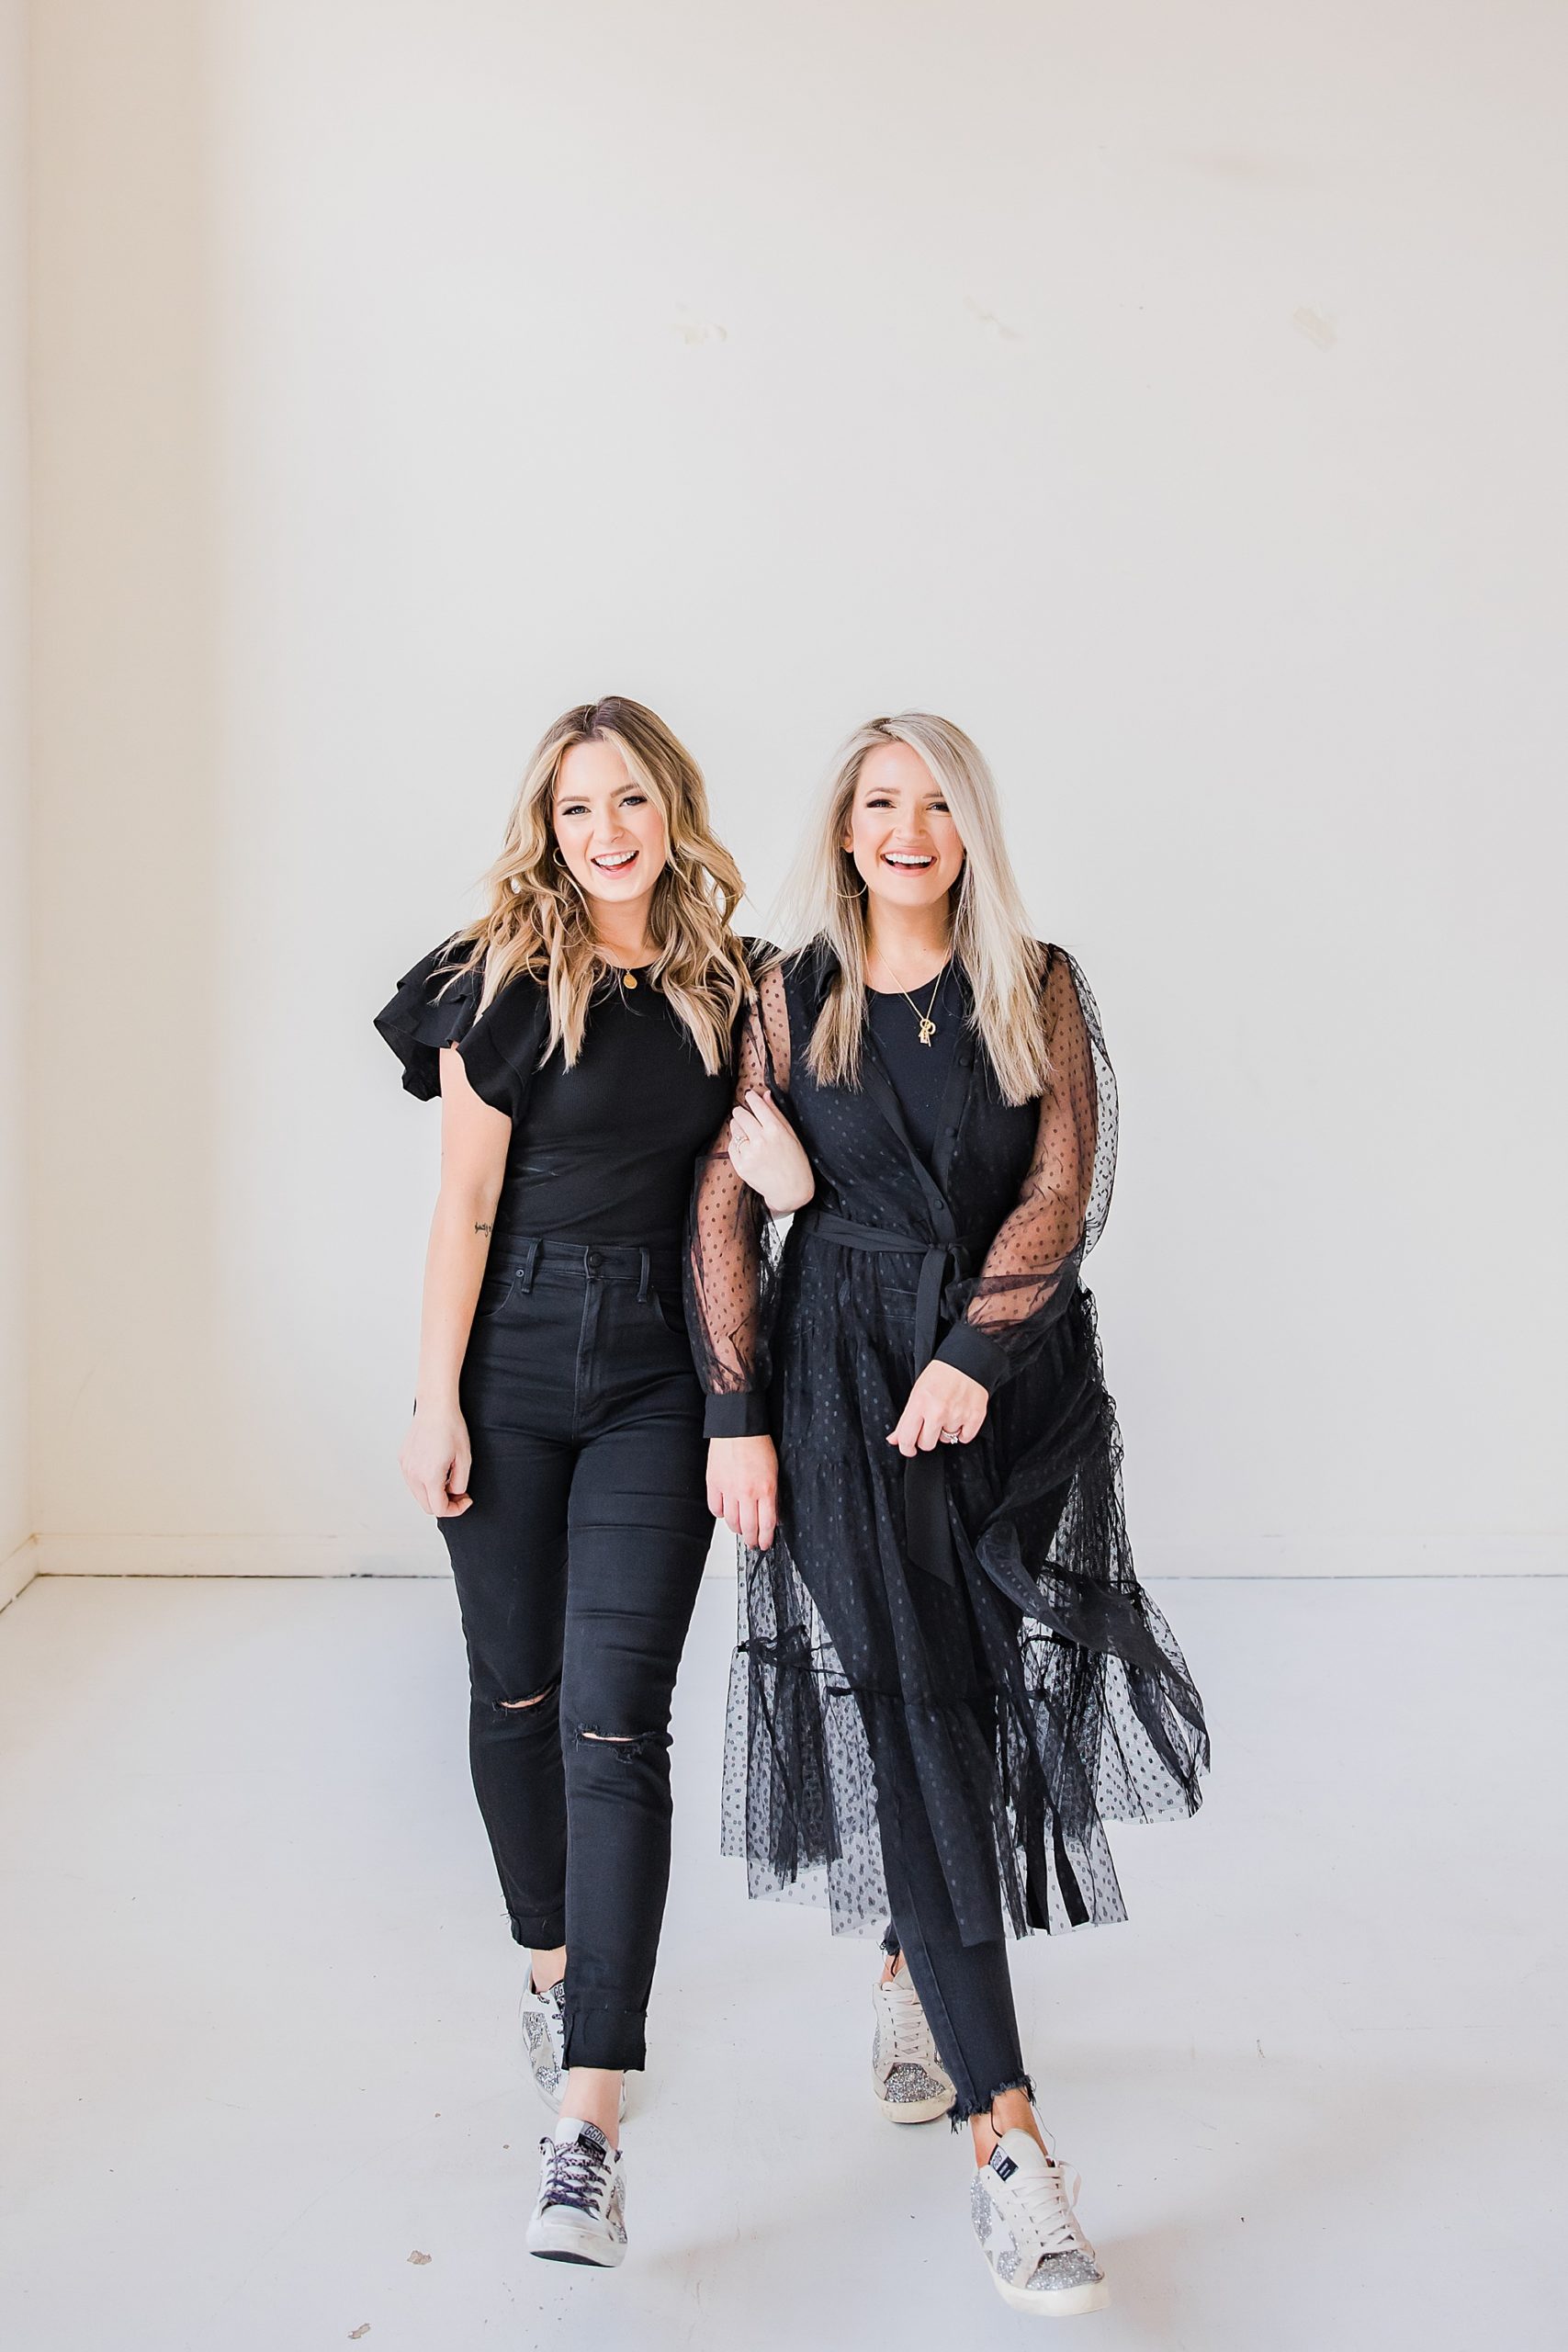 stylists walk together in studio during branding photos 